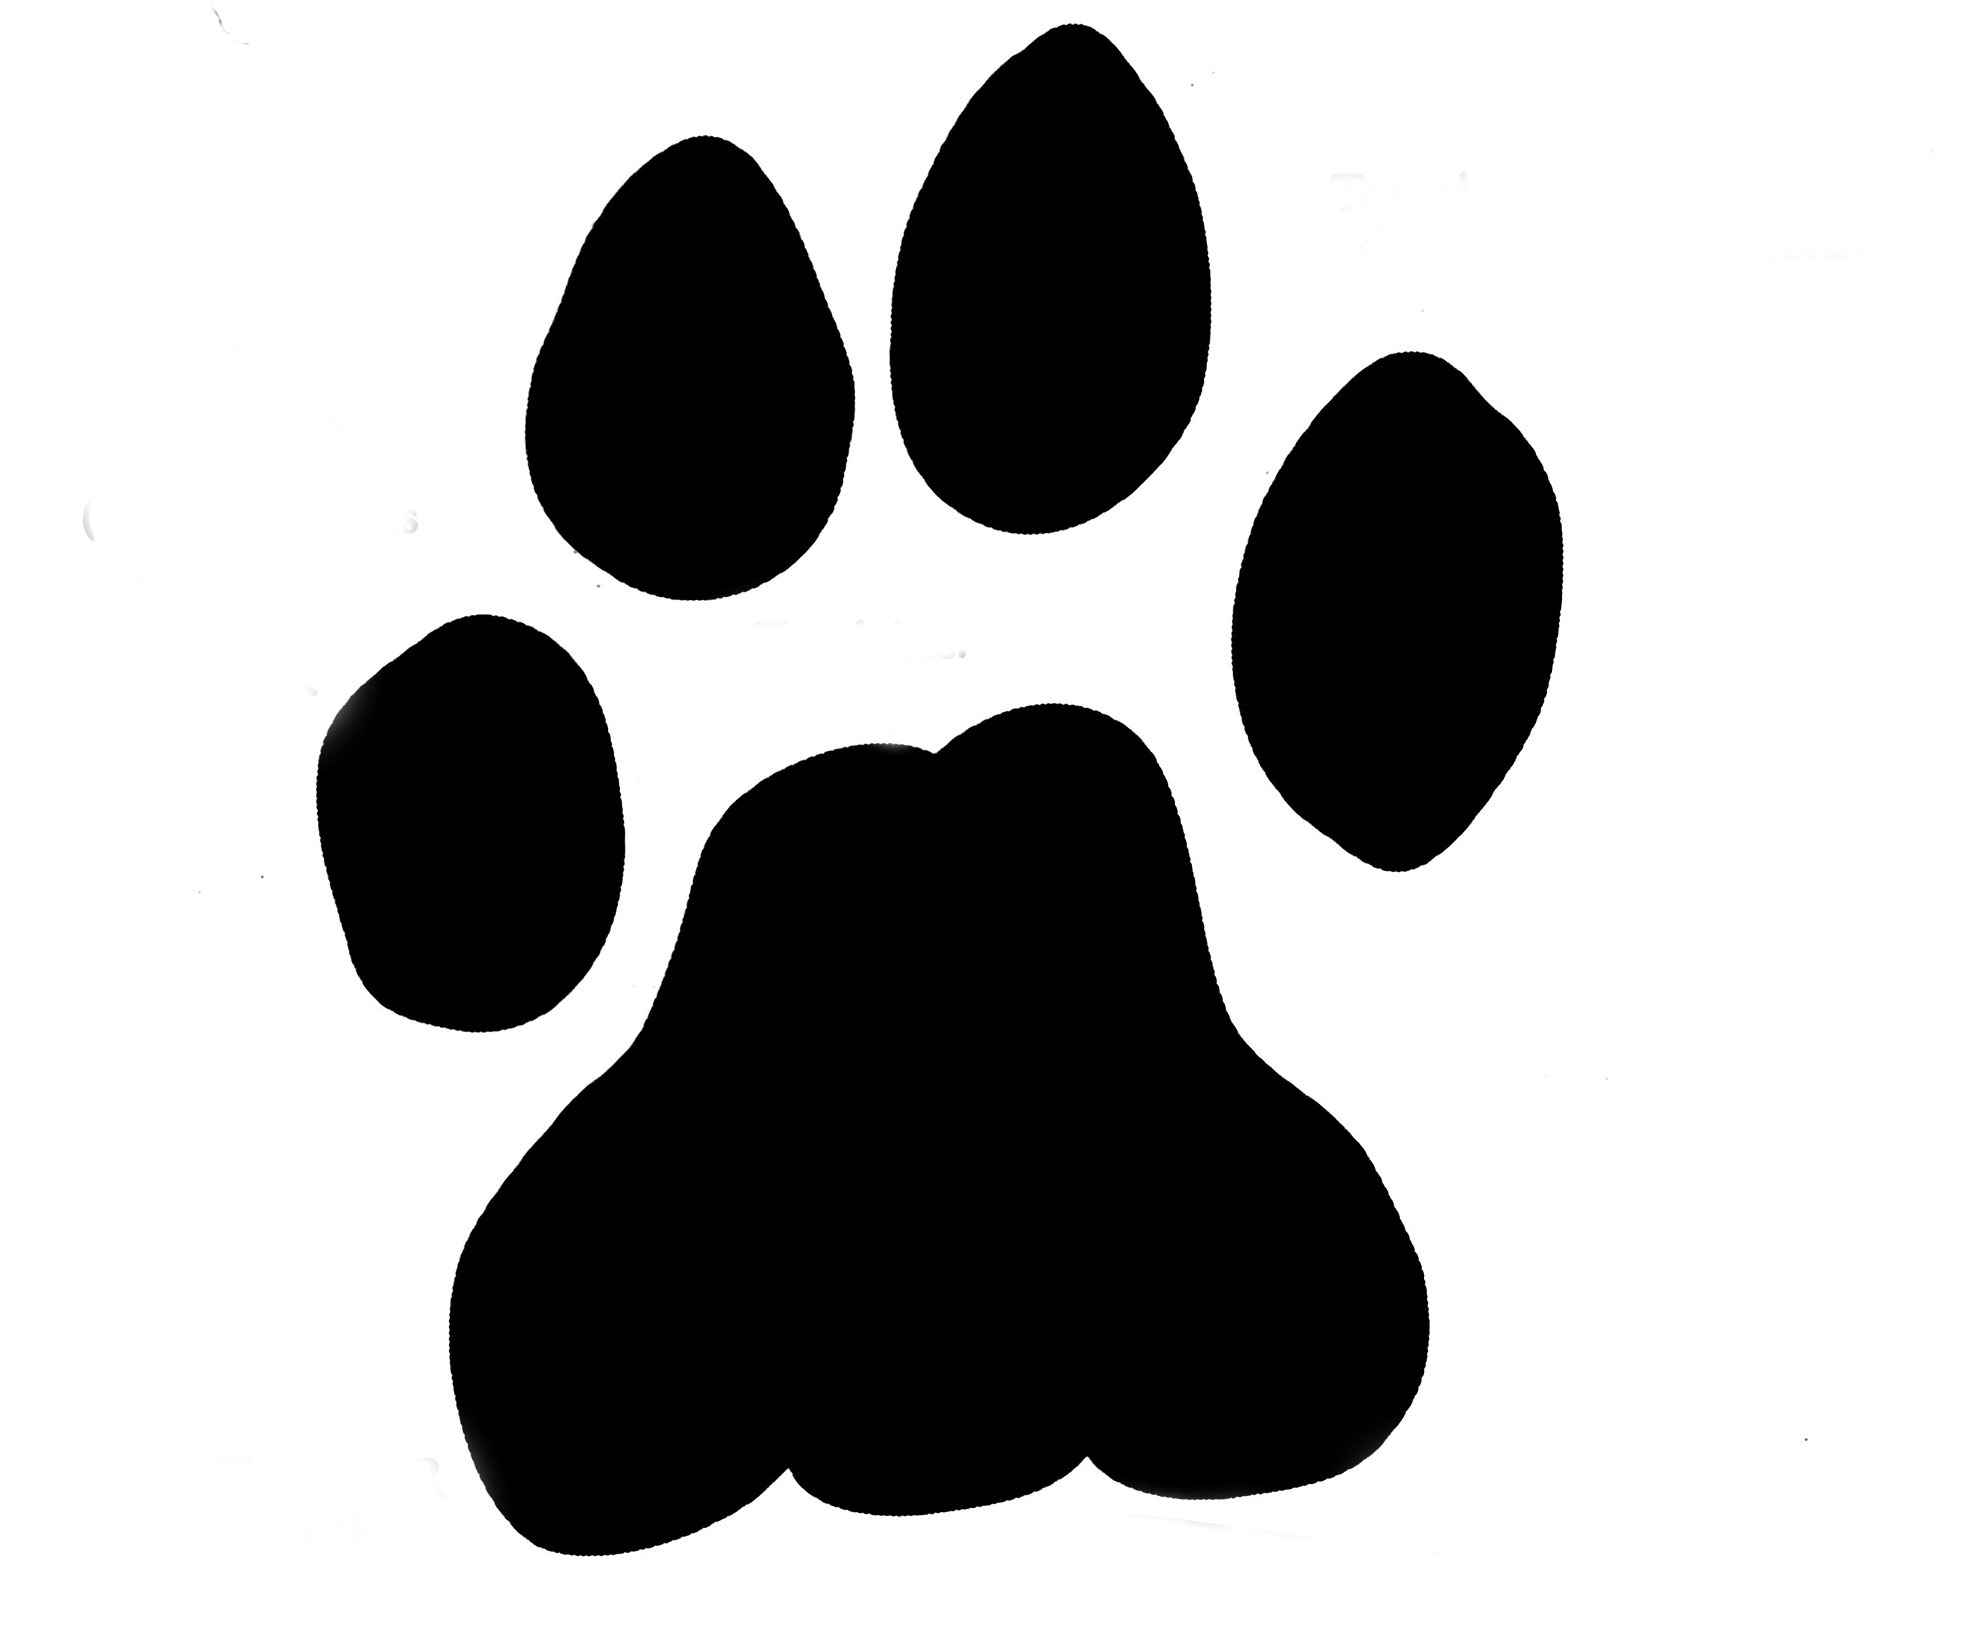 27 Lion Paw Prints Free Cliparts That You Can Download To You Computer